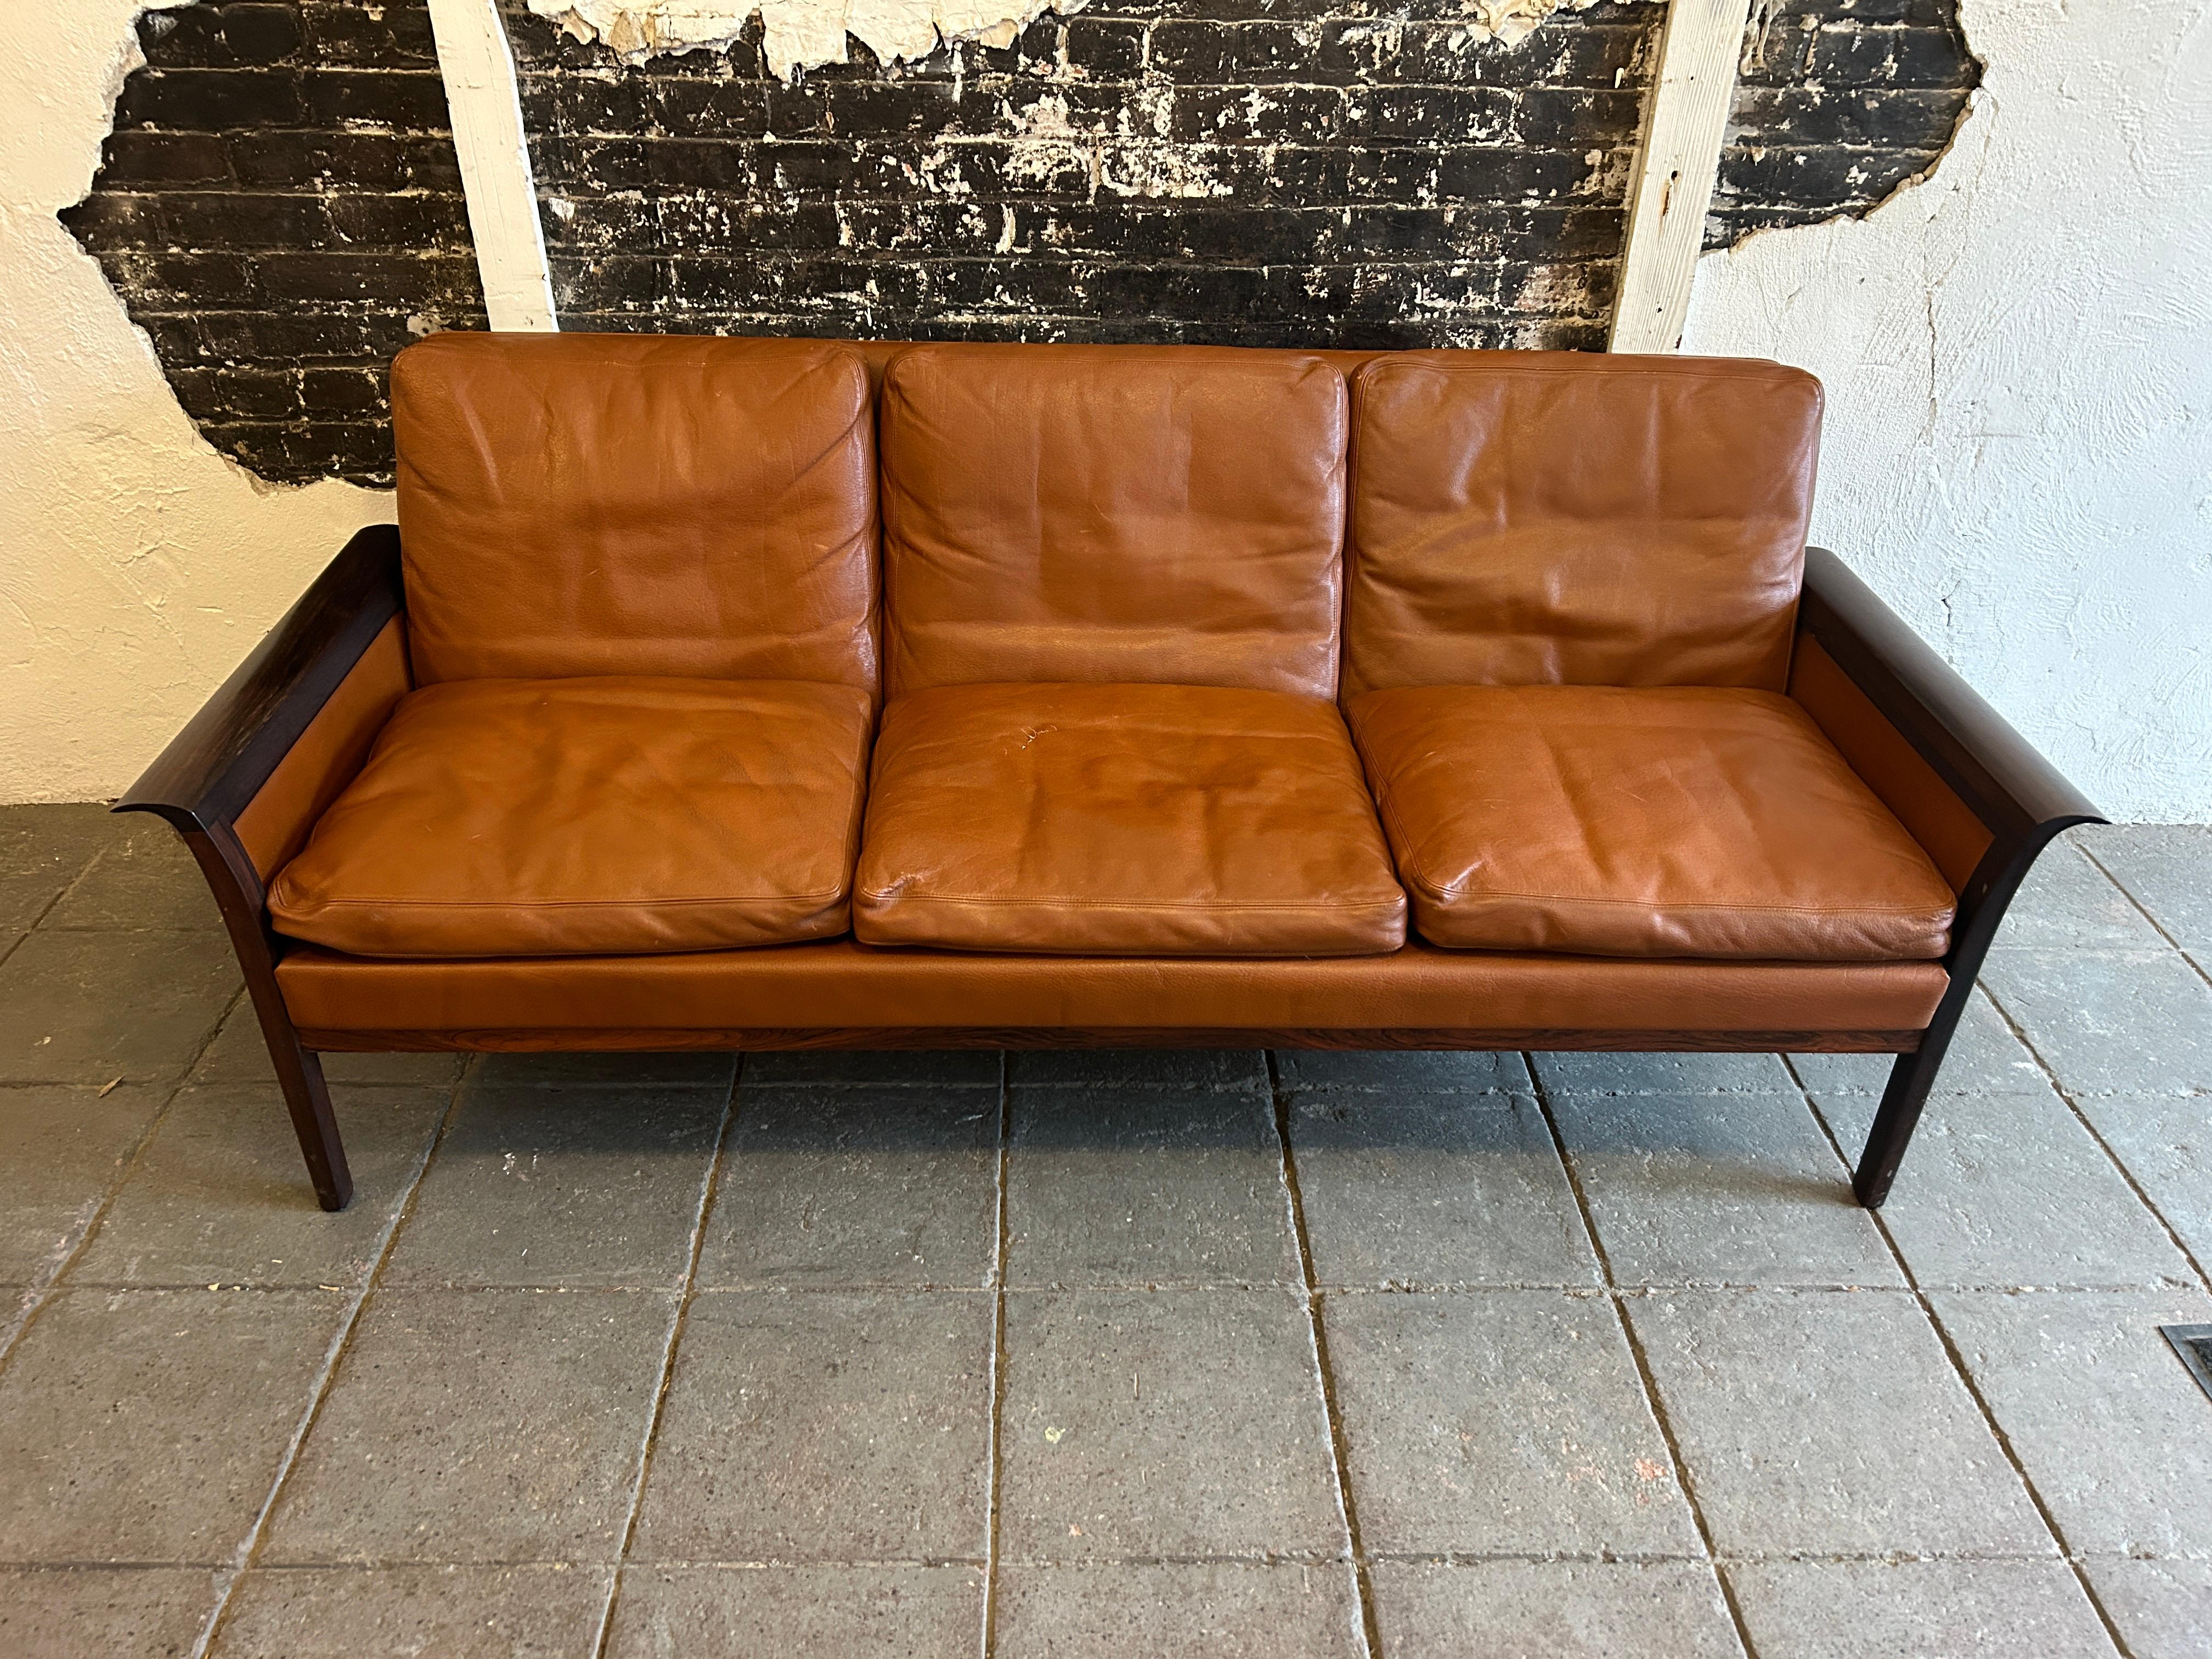 Beautiful Knut Saeter for Vatne Mobler Tan leather and rosewood three-seat sofa couch. All original cognac brown leather upholstery worn in nicely. Stunning rosewood curved arms and legs. Very solid 3 seat cognac leather sofa with original down